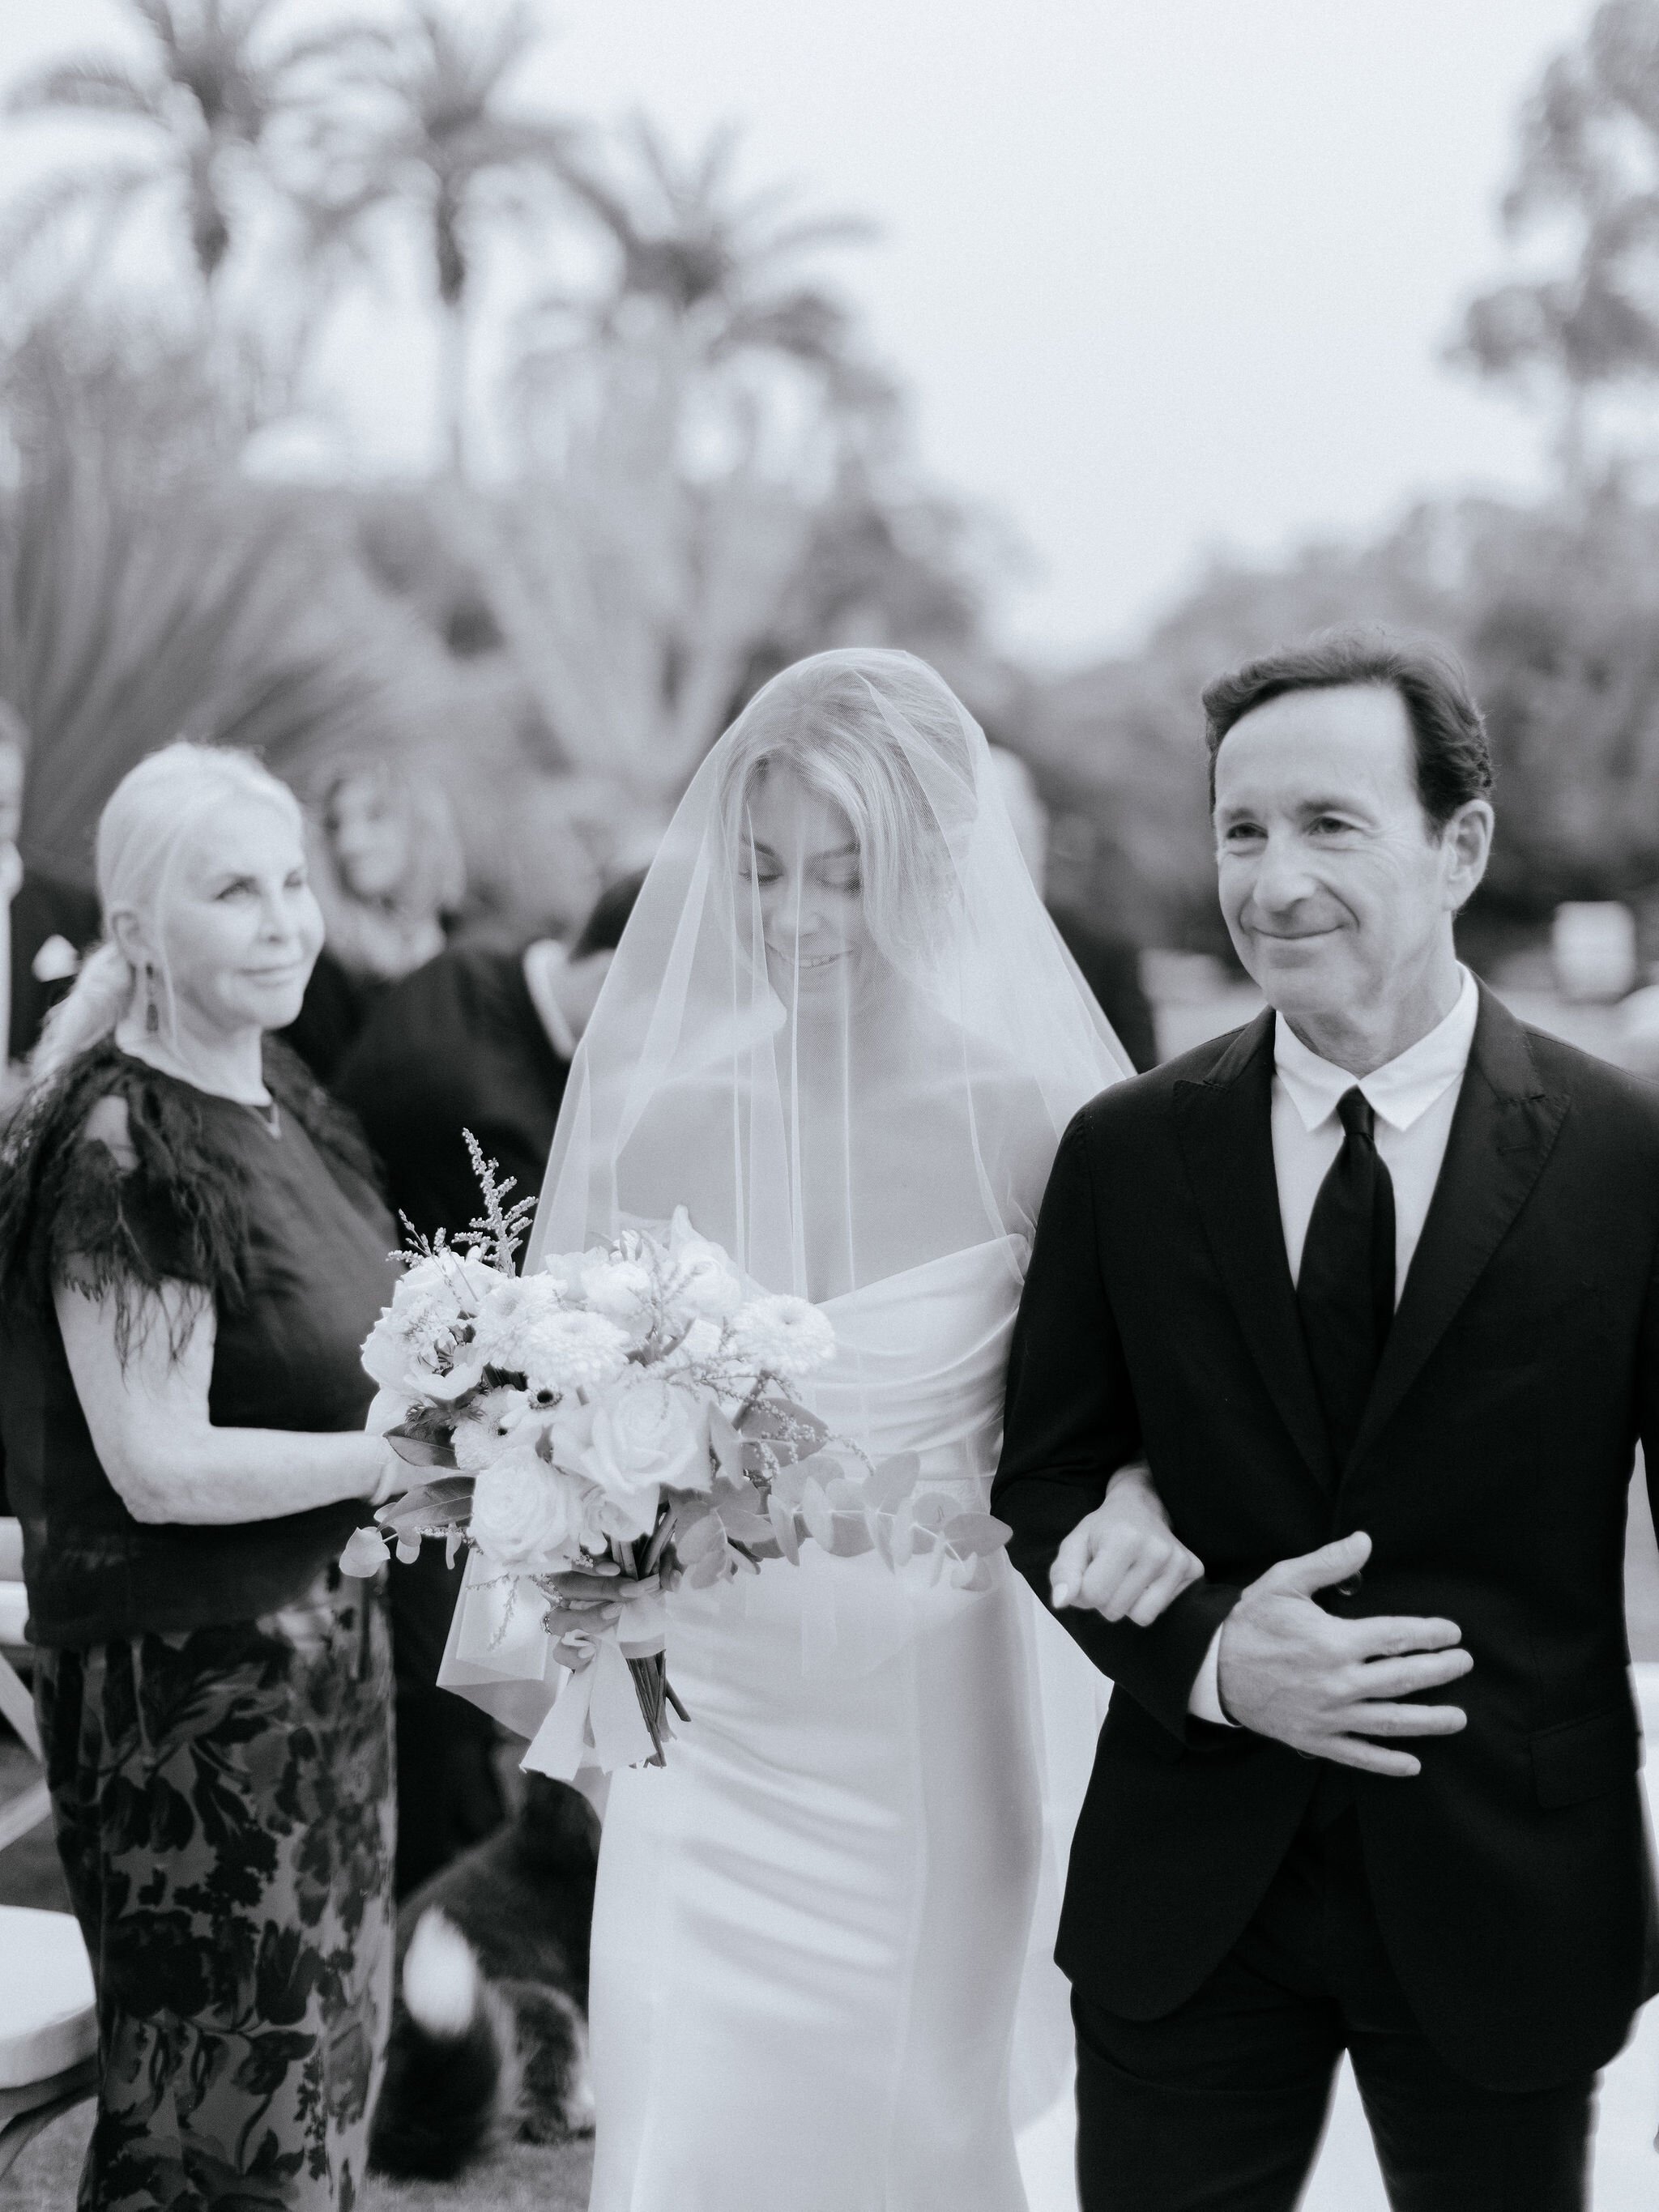 www.santabarbaraweddings.com | Chris J. Evans | Private Residence | Ashley Chanel Events | Rogue &amp; Fox | The Makeup Papi | Bride Walking Down the Aisle with Her Father